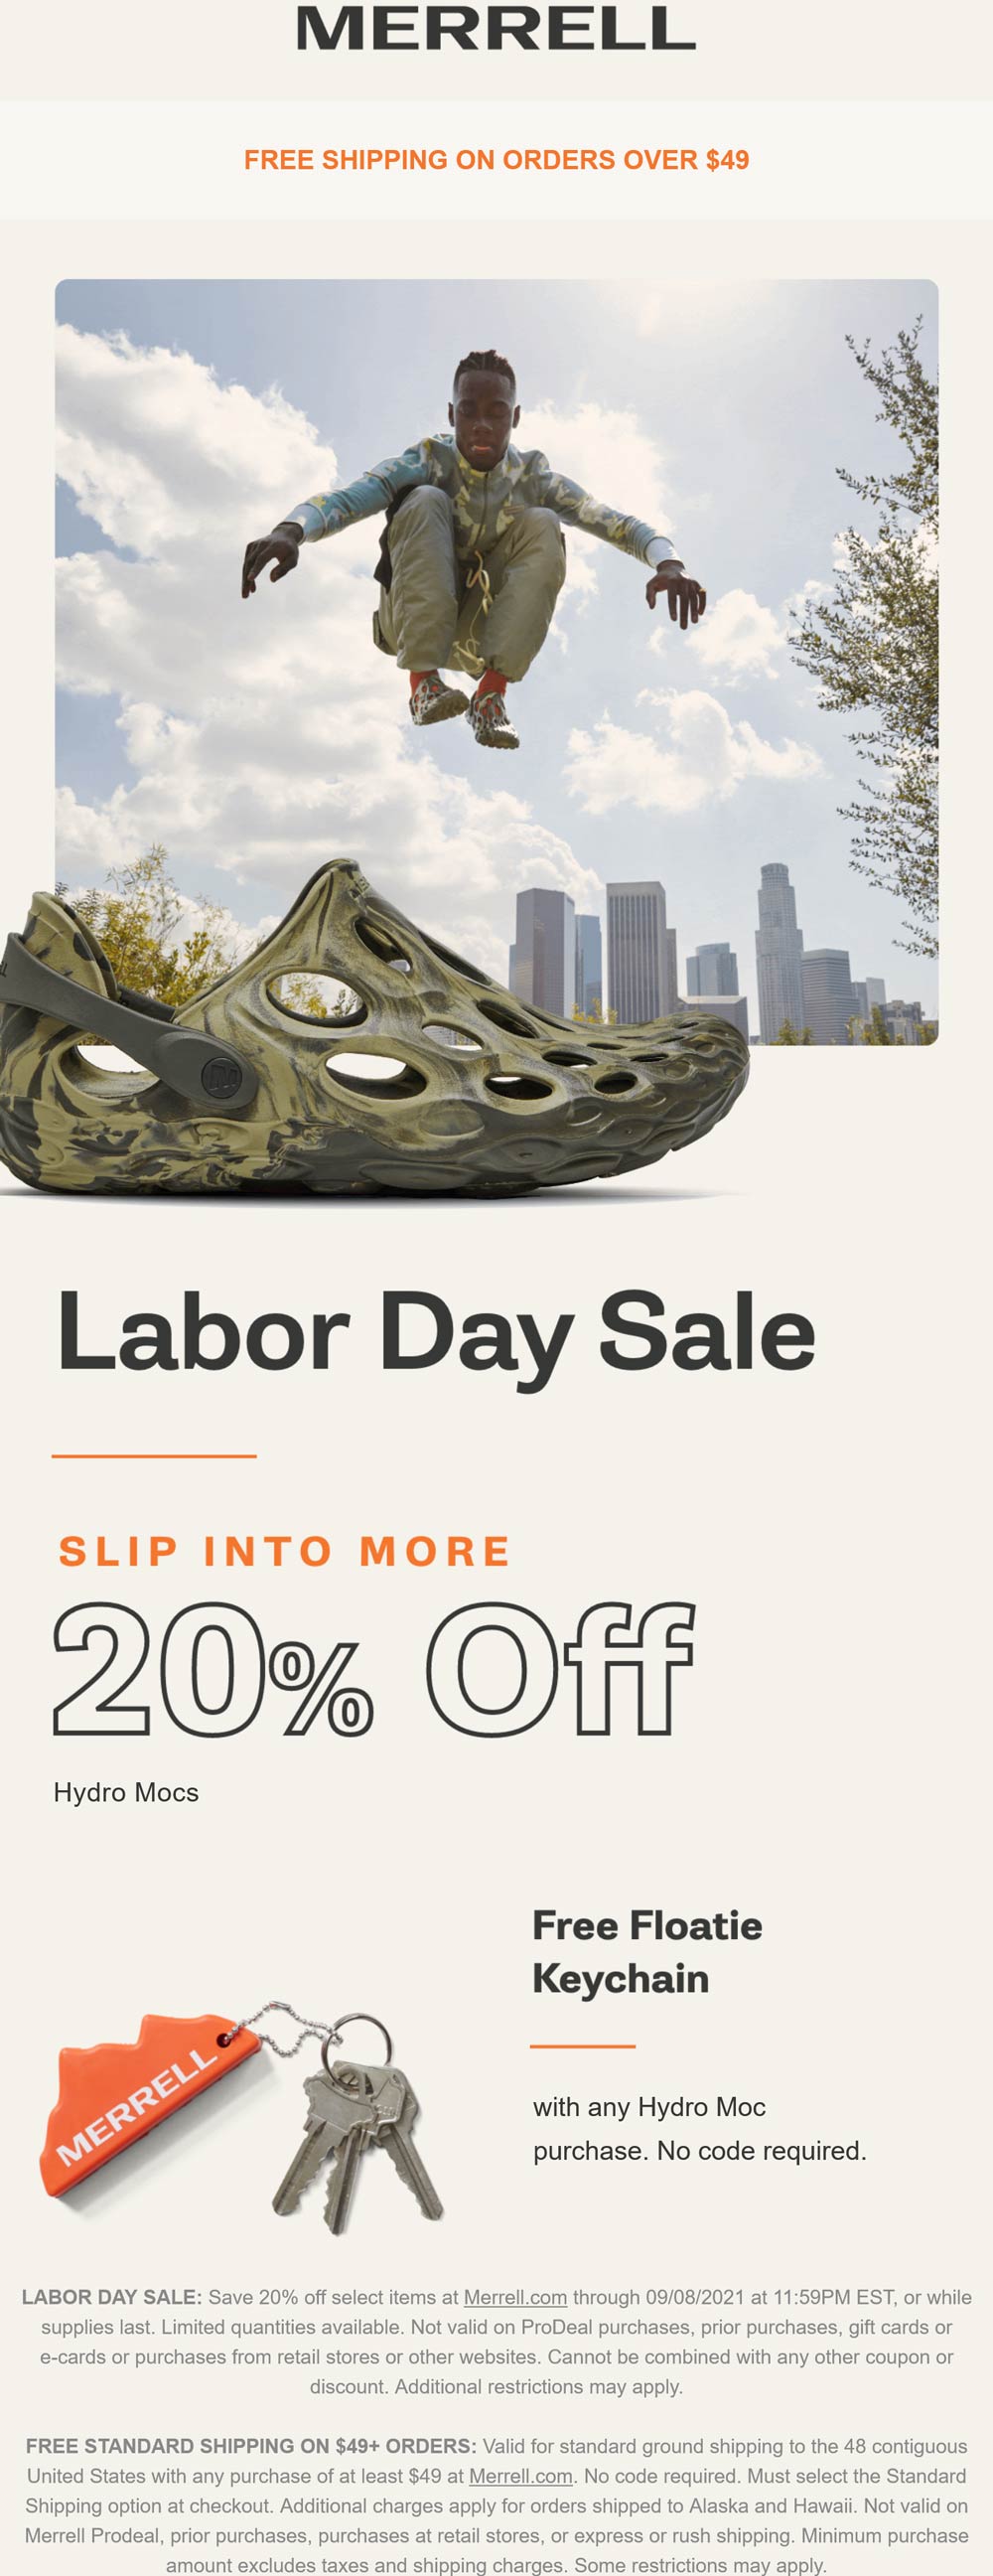 Merrell stores Coupon  20% off hydro mocs + free floaty keychain at Merrell #merrell 